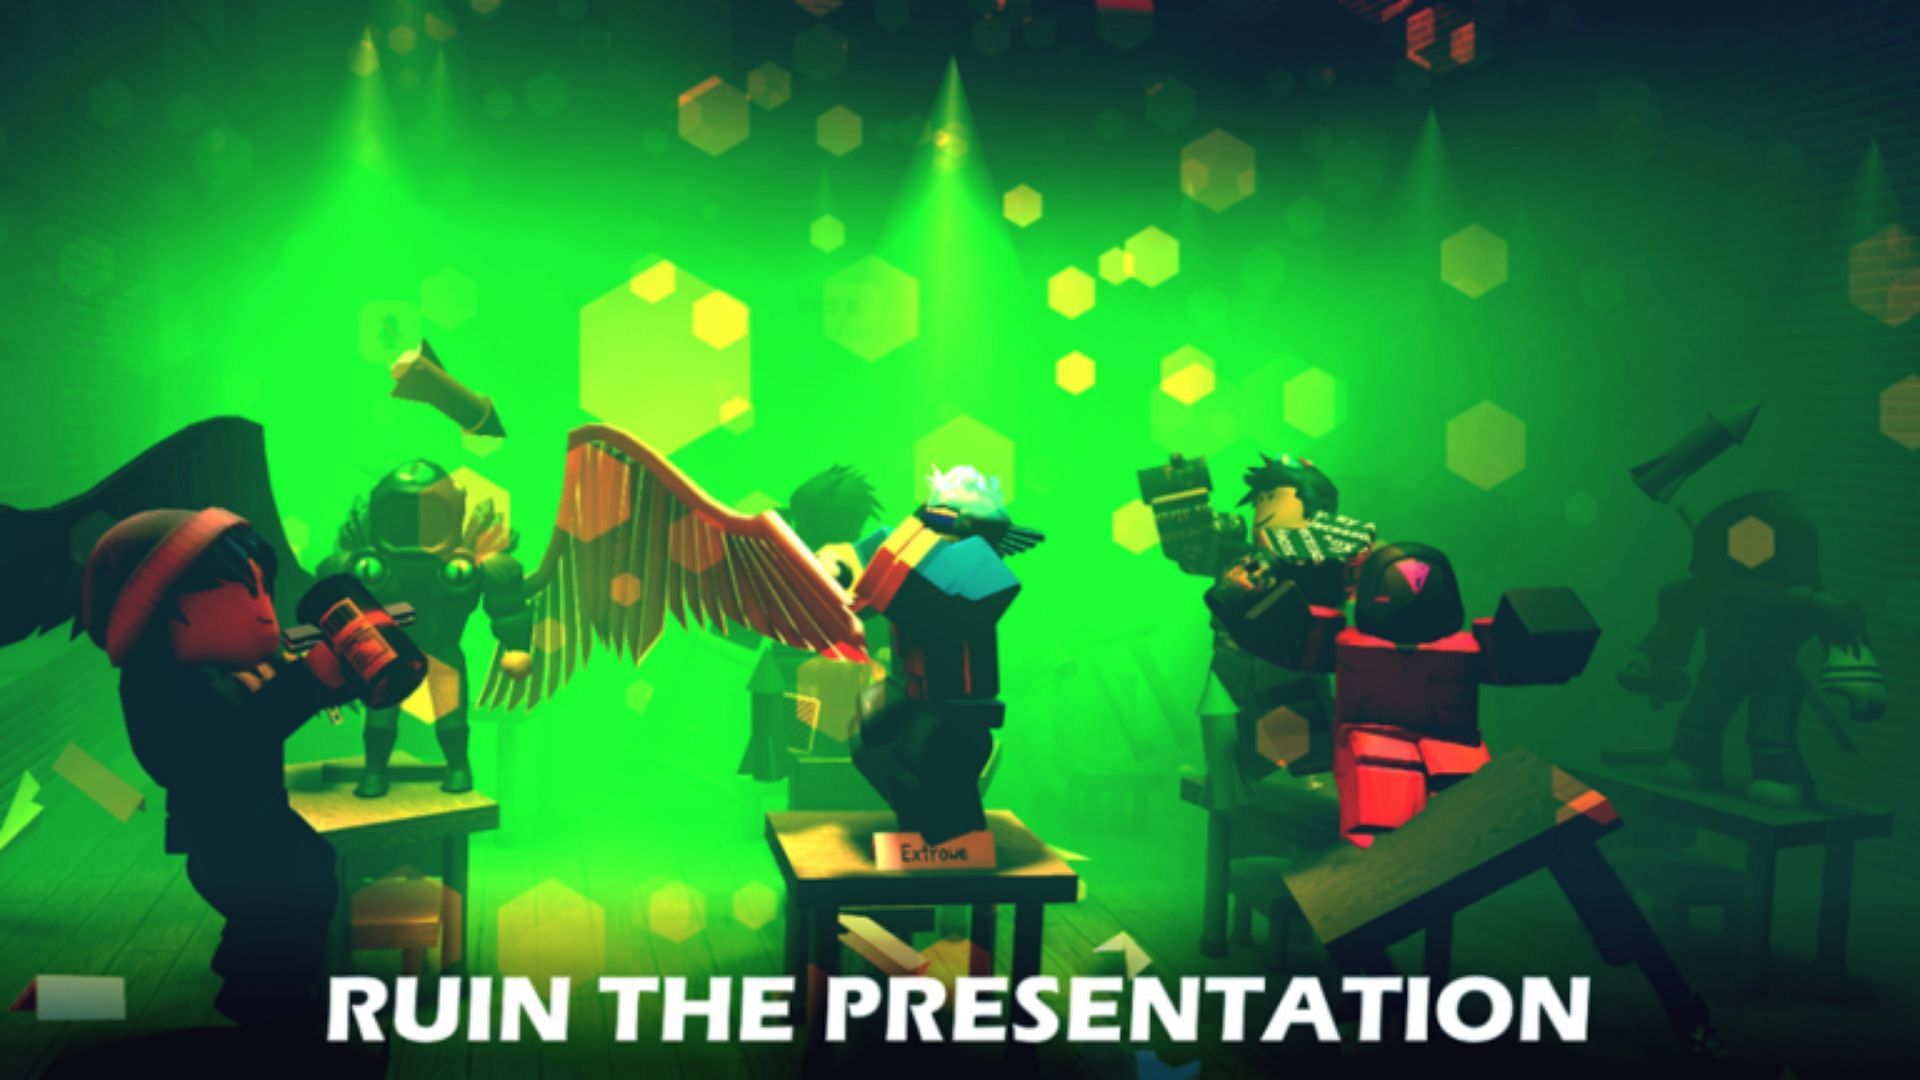 Codes for The Presentation Experience and their importance (Image via Roblox)